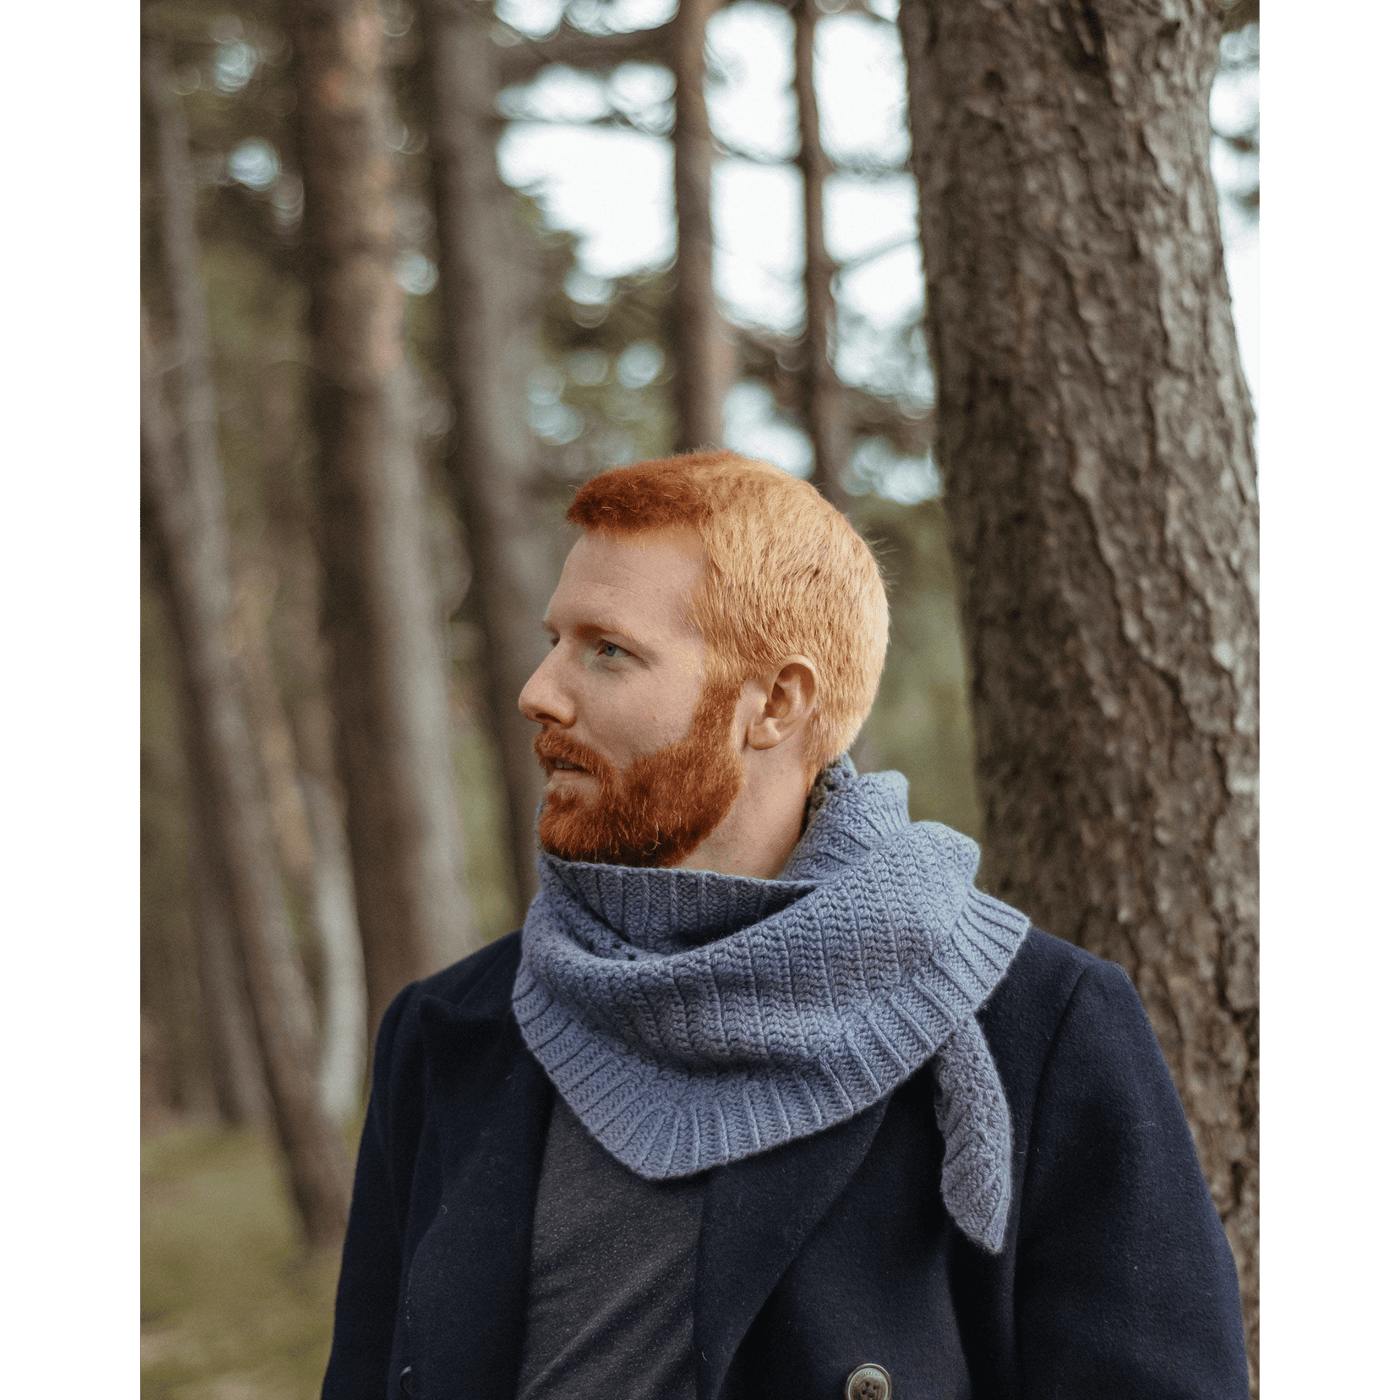 The Woolly Thistle Moorit Magazine - Issue 1 image from magazine showing man wearing knitted blue scarf